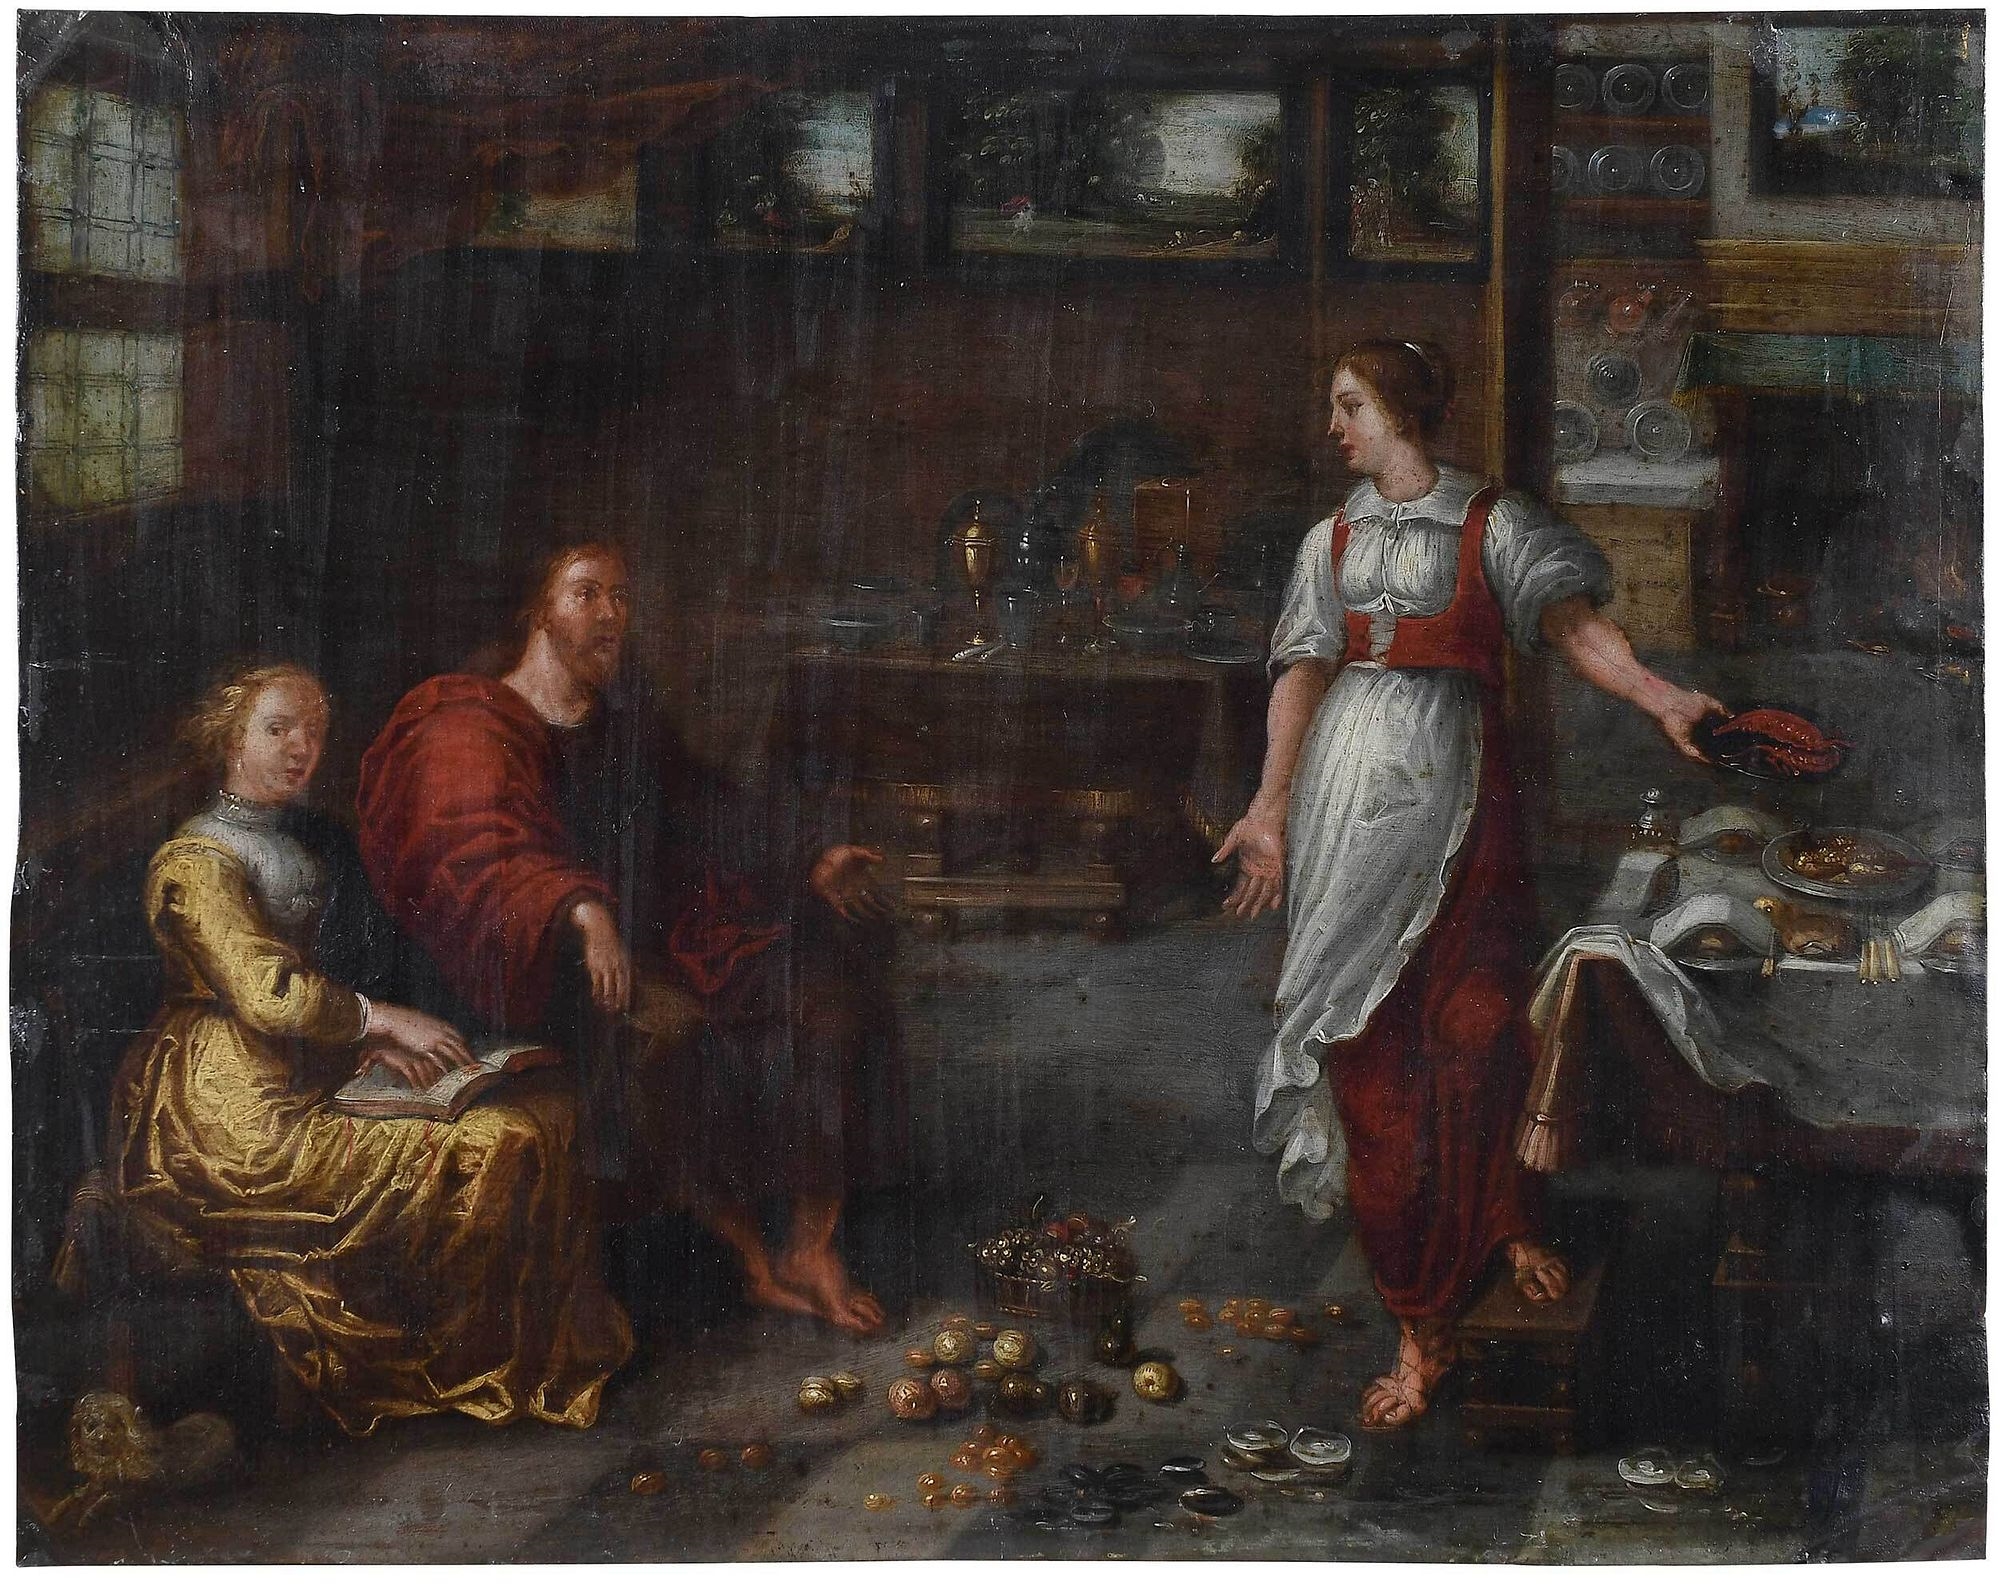 Christ in the House of Mary and Martha by Flemish School, 17th Century, 17th century